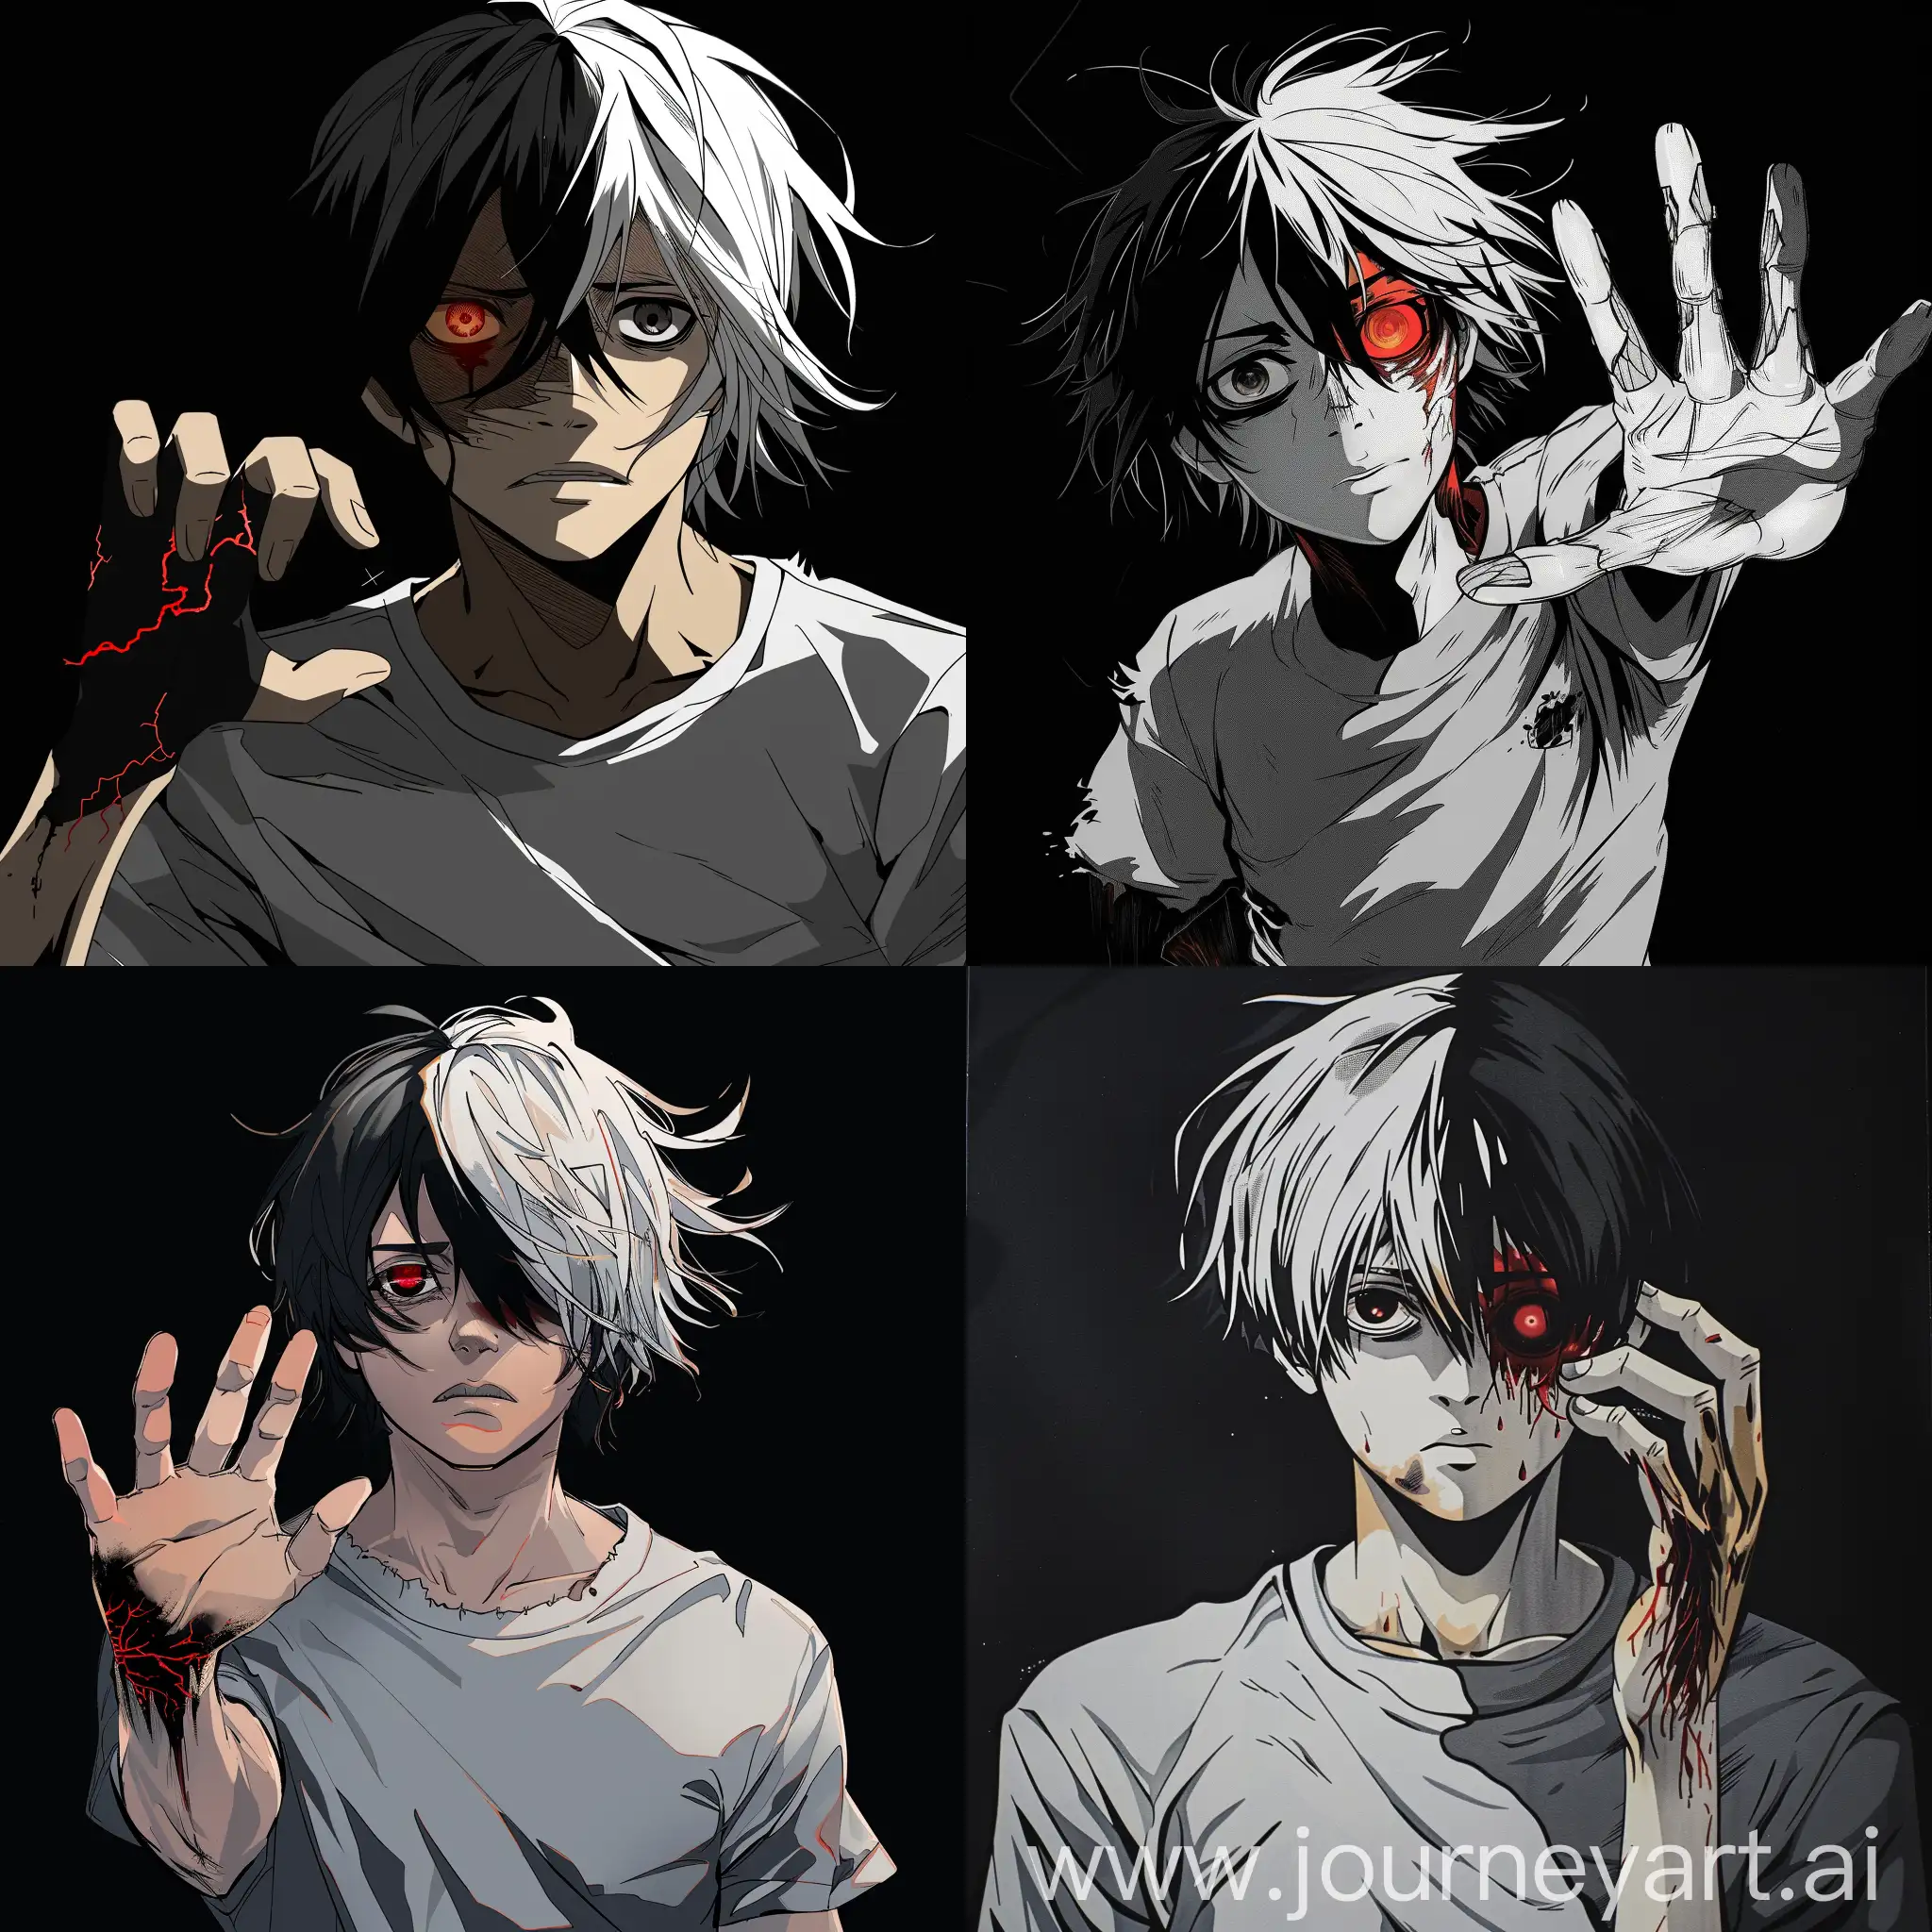 Anime-Style-Portrait-of-Man-with-DualColored-Eyes-and-Unique-Hand-in-Grey-TShirt